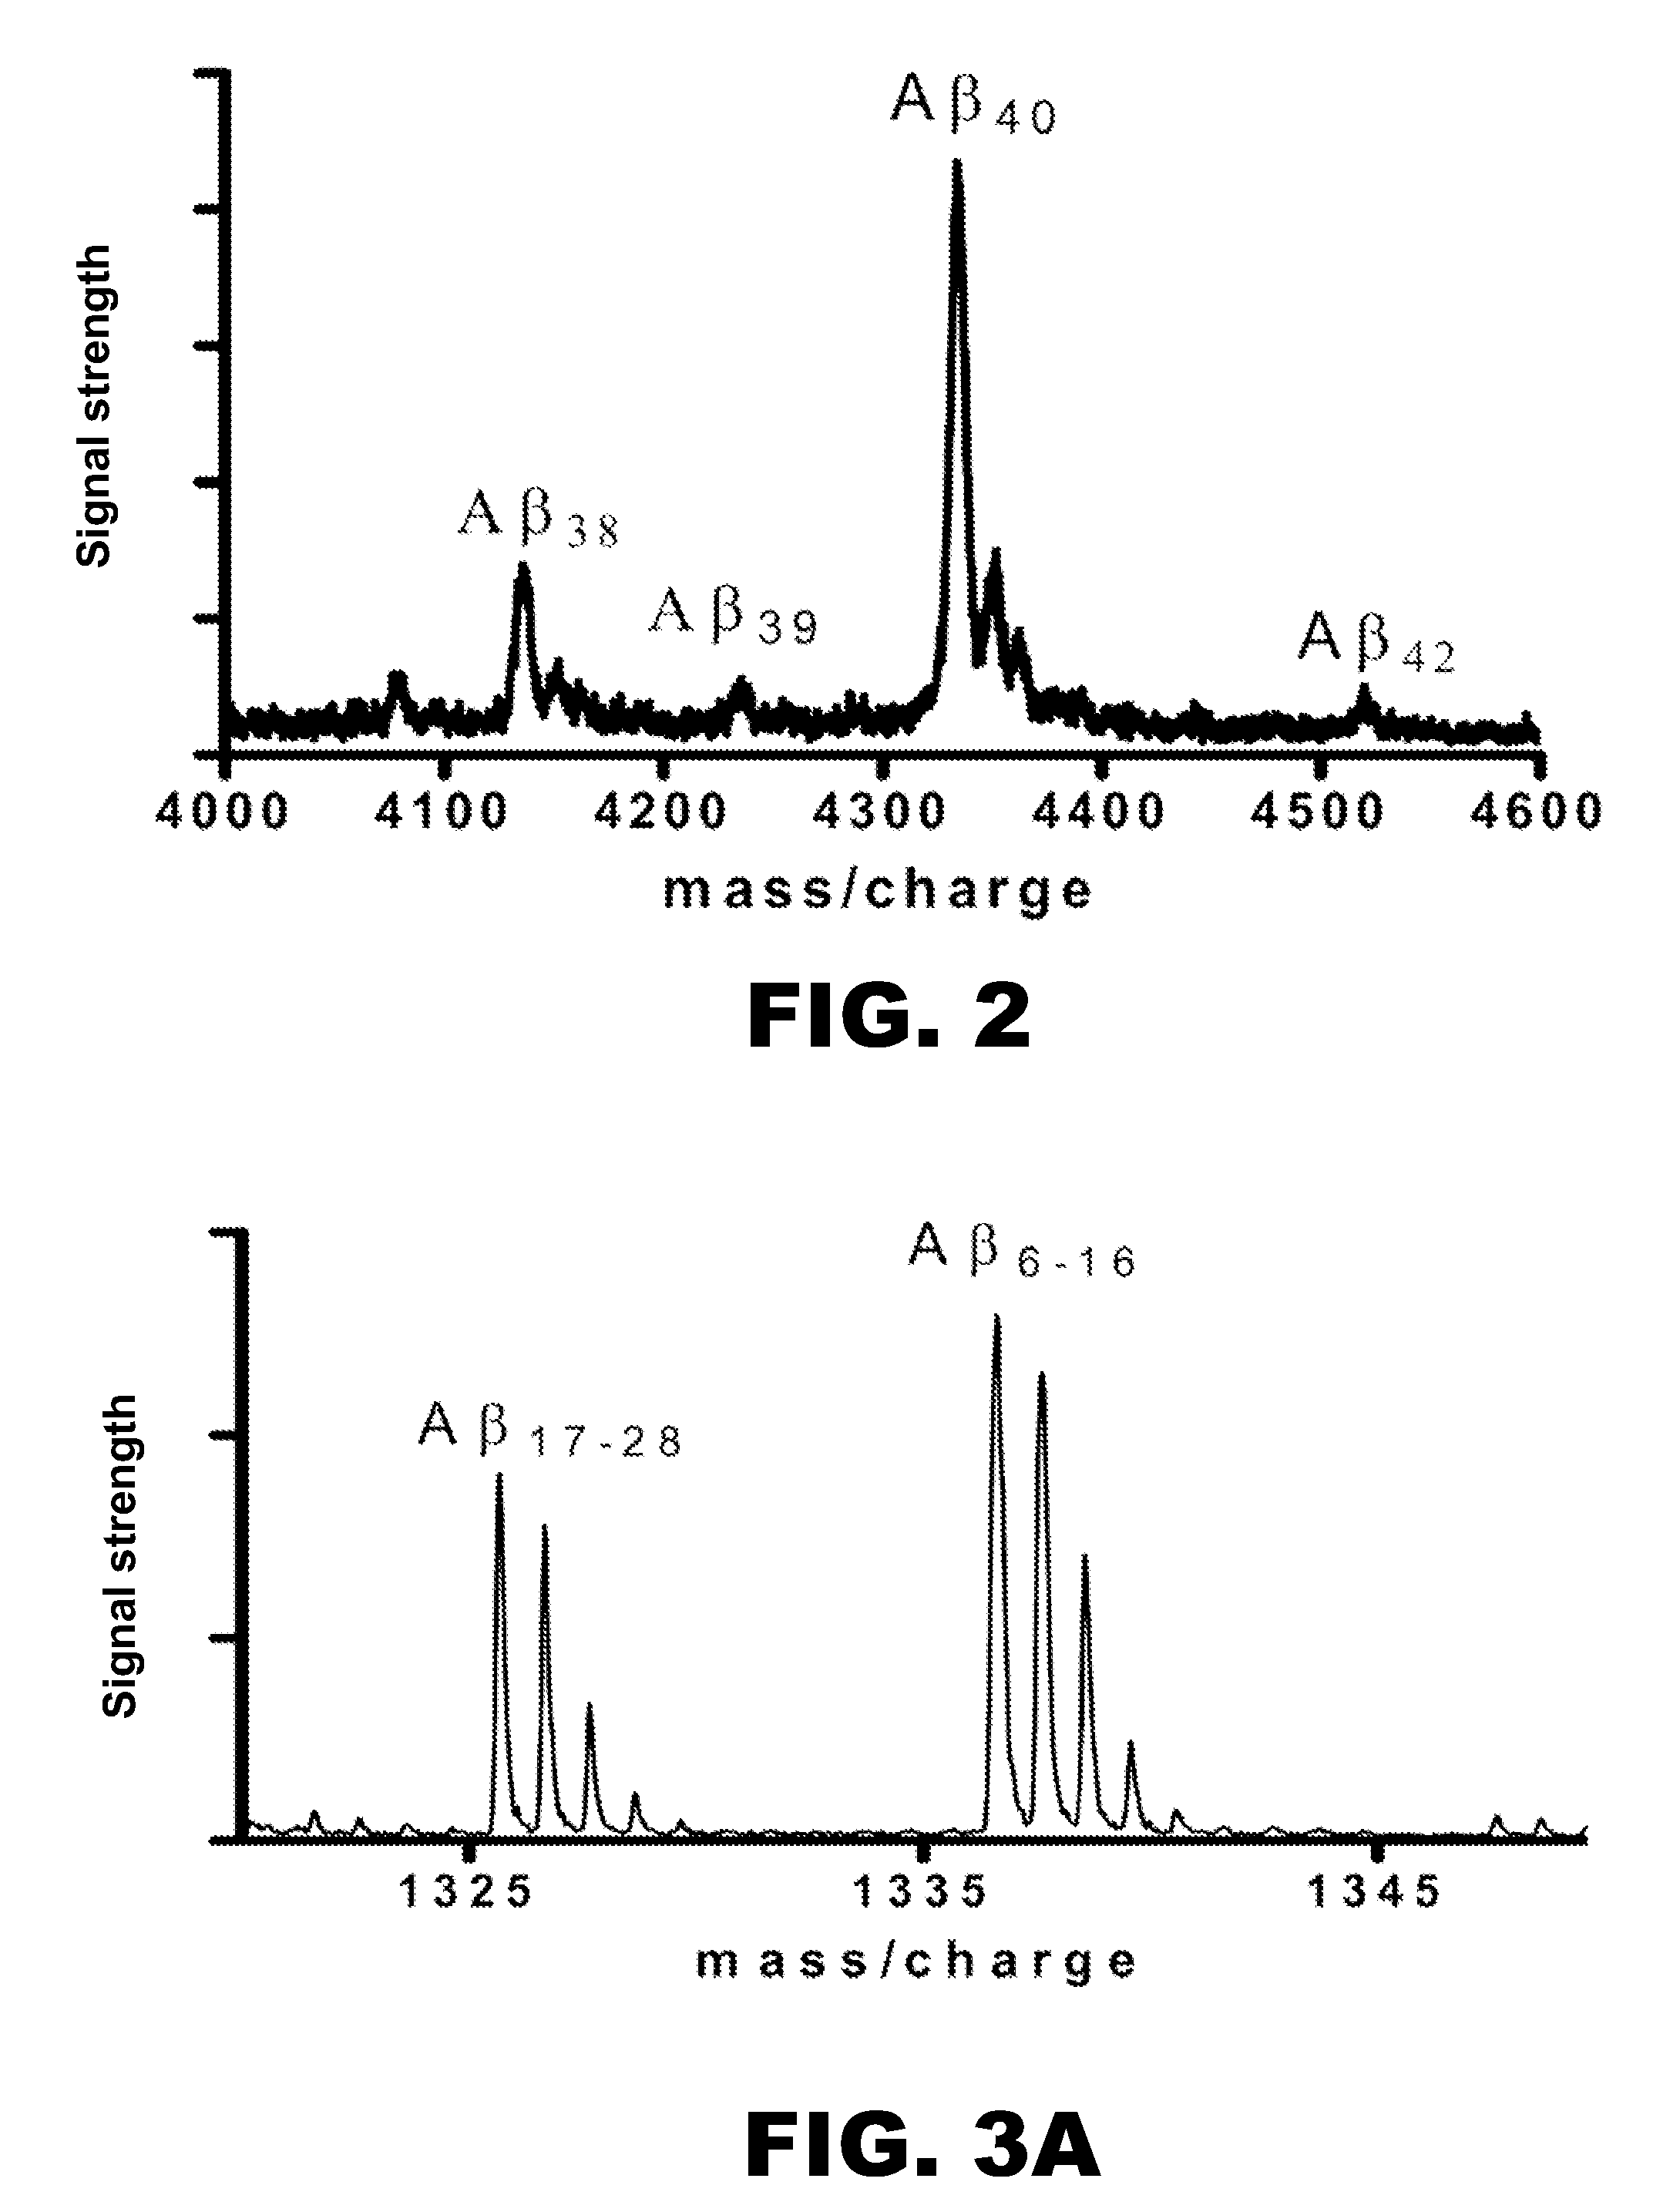 Methods for measuring the metabolism of CNS derived biomolecules in vivo